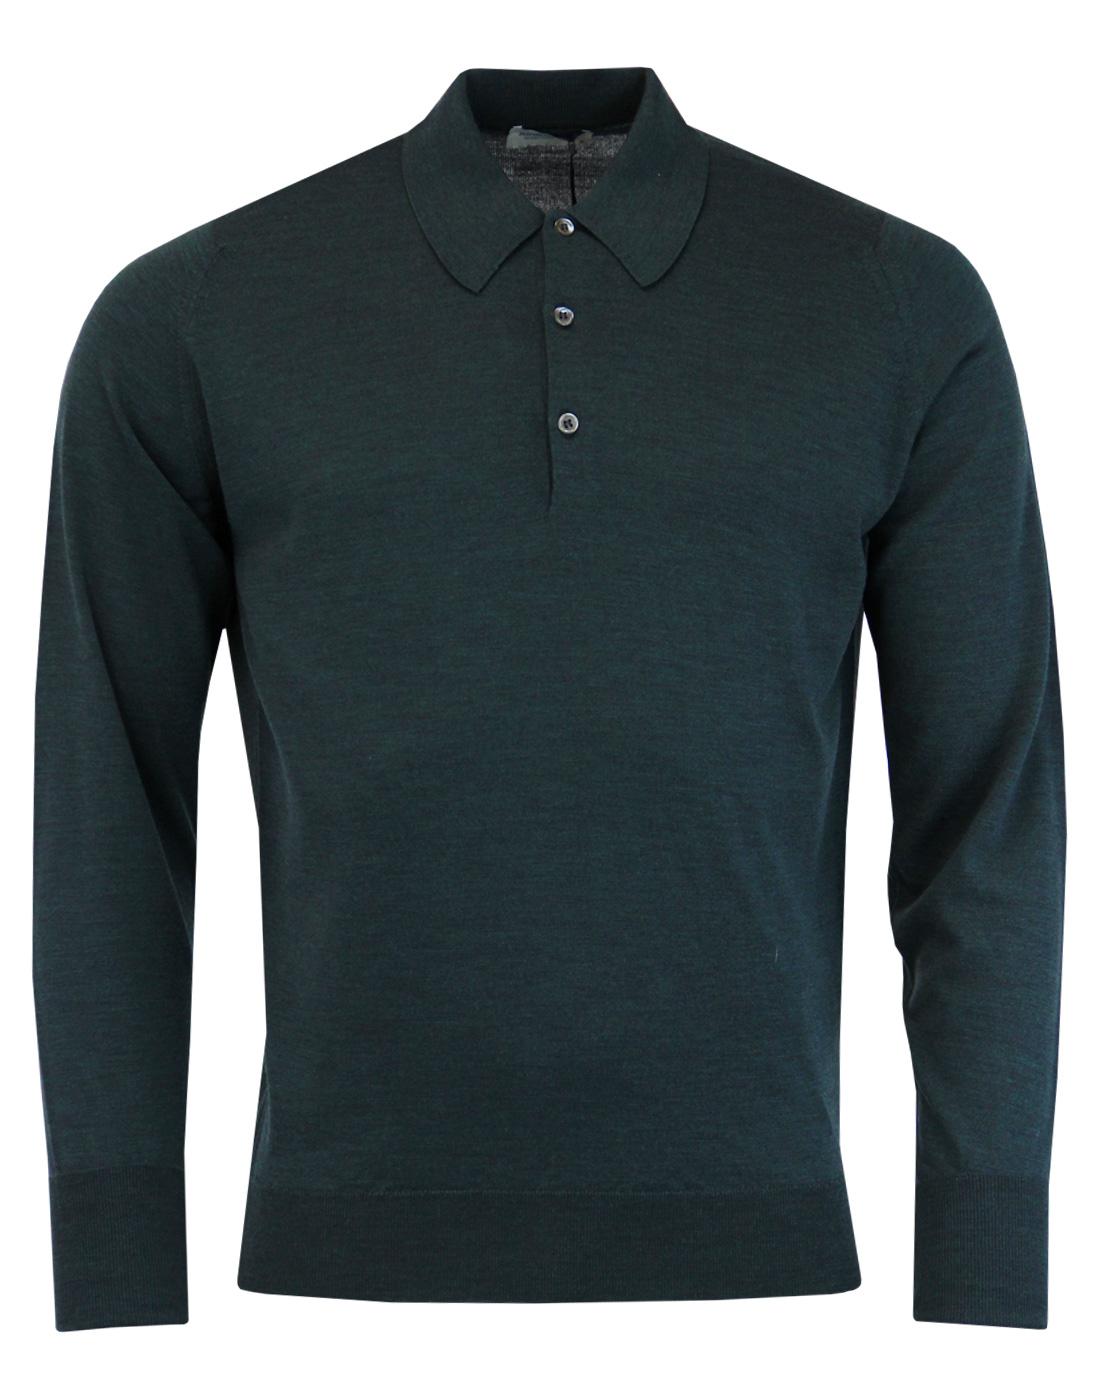 Dorset JOHN SMEDLEY Made in England Knitted Polo G